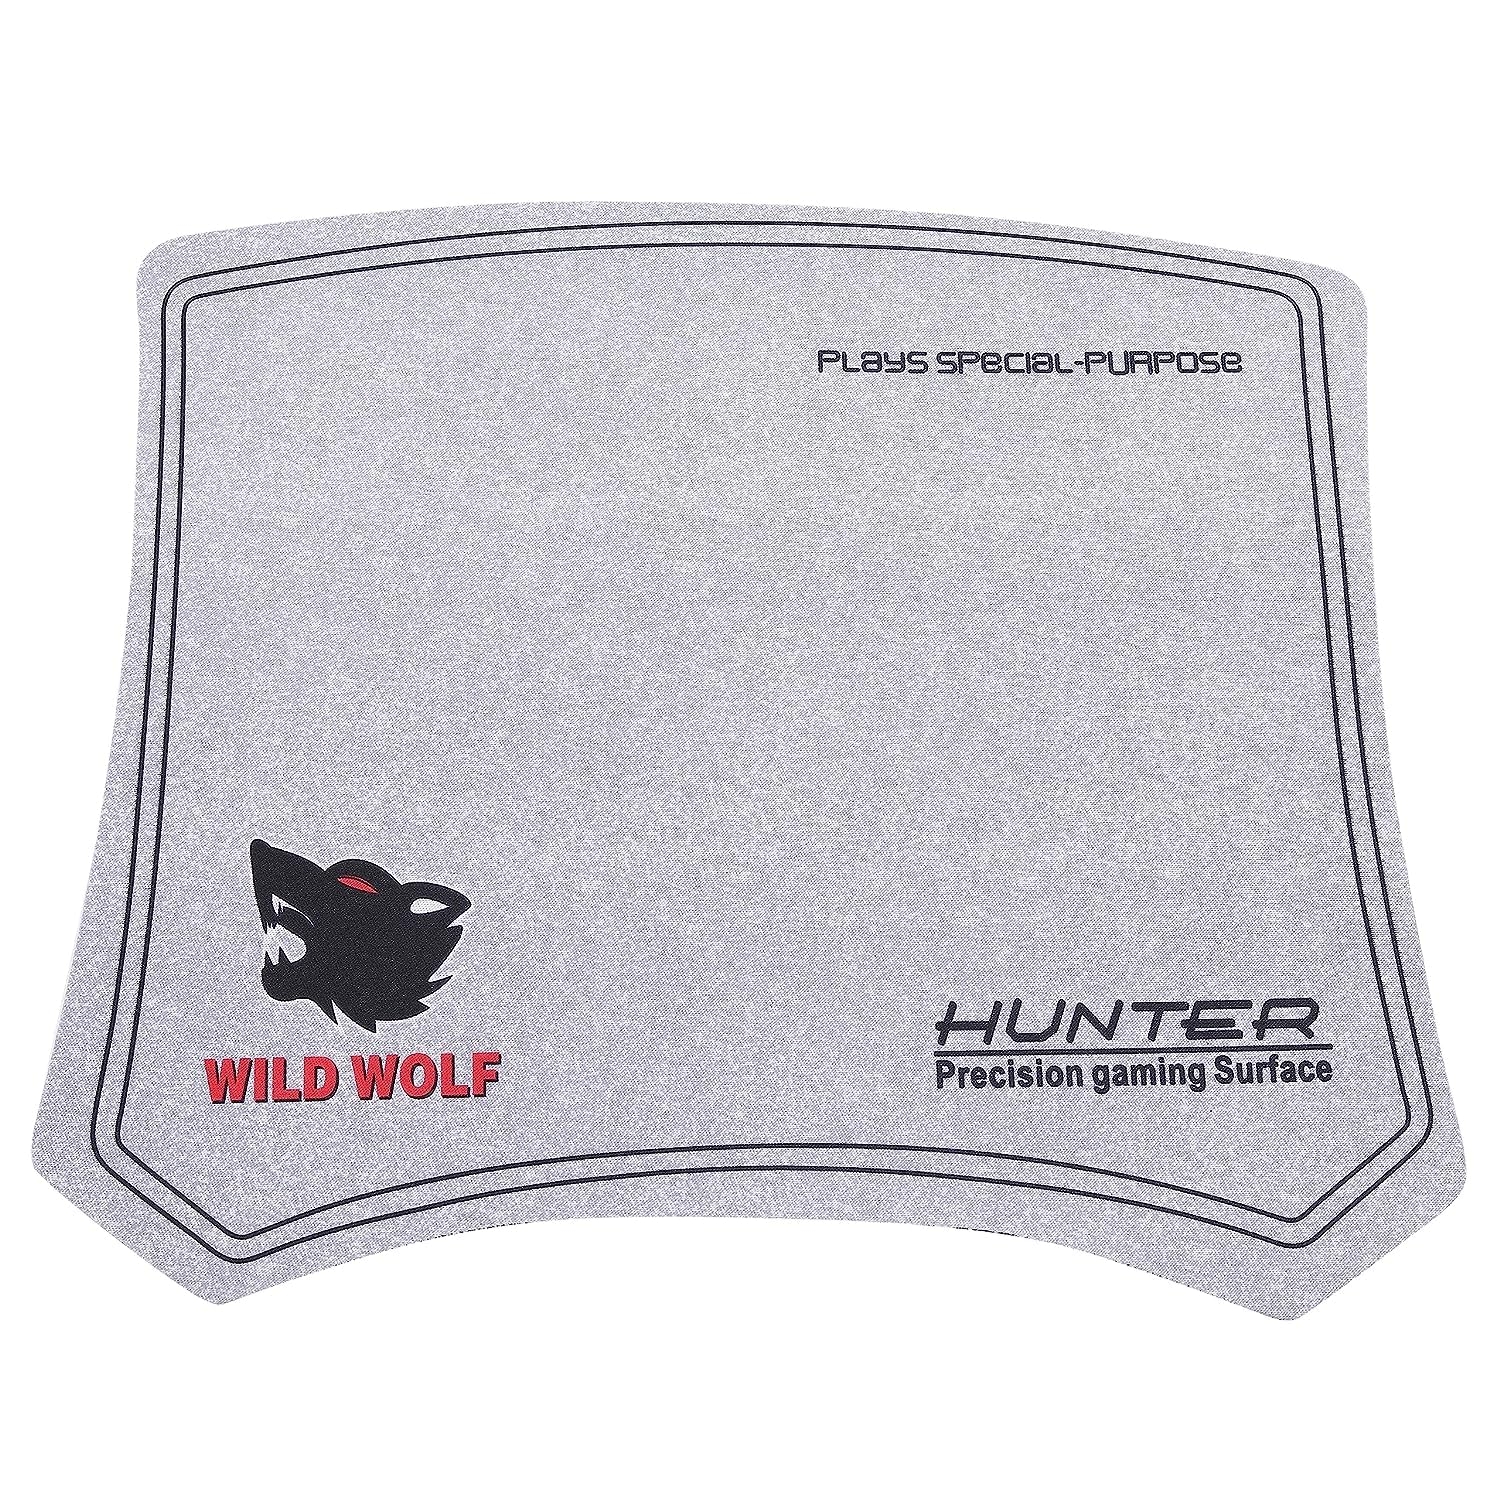 ADNET Soft Gaming Mouse Pad for Desktop, Laptop | Mousepad without Border Hunter Precision